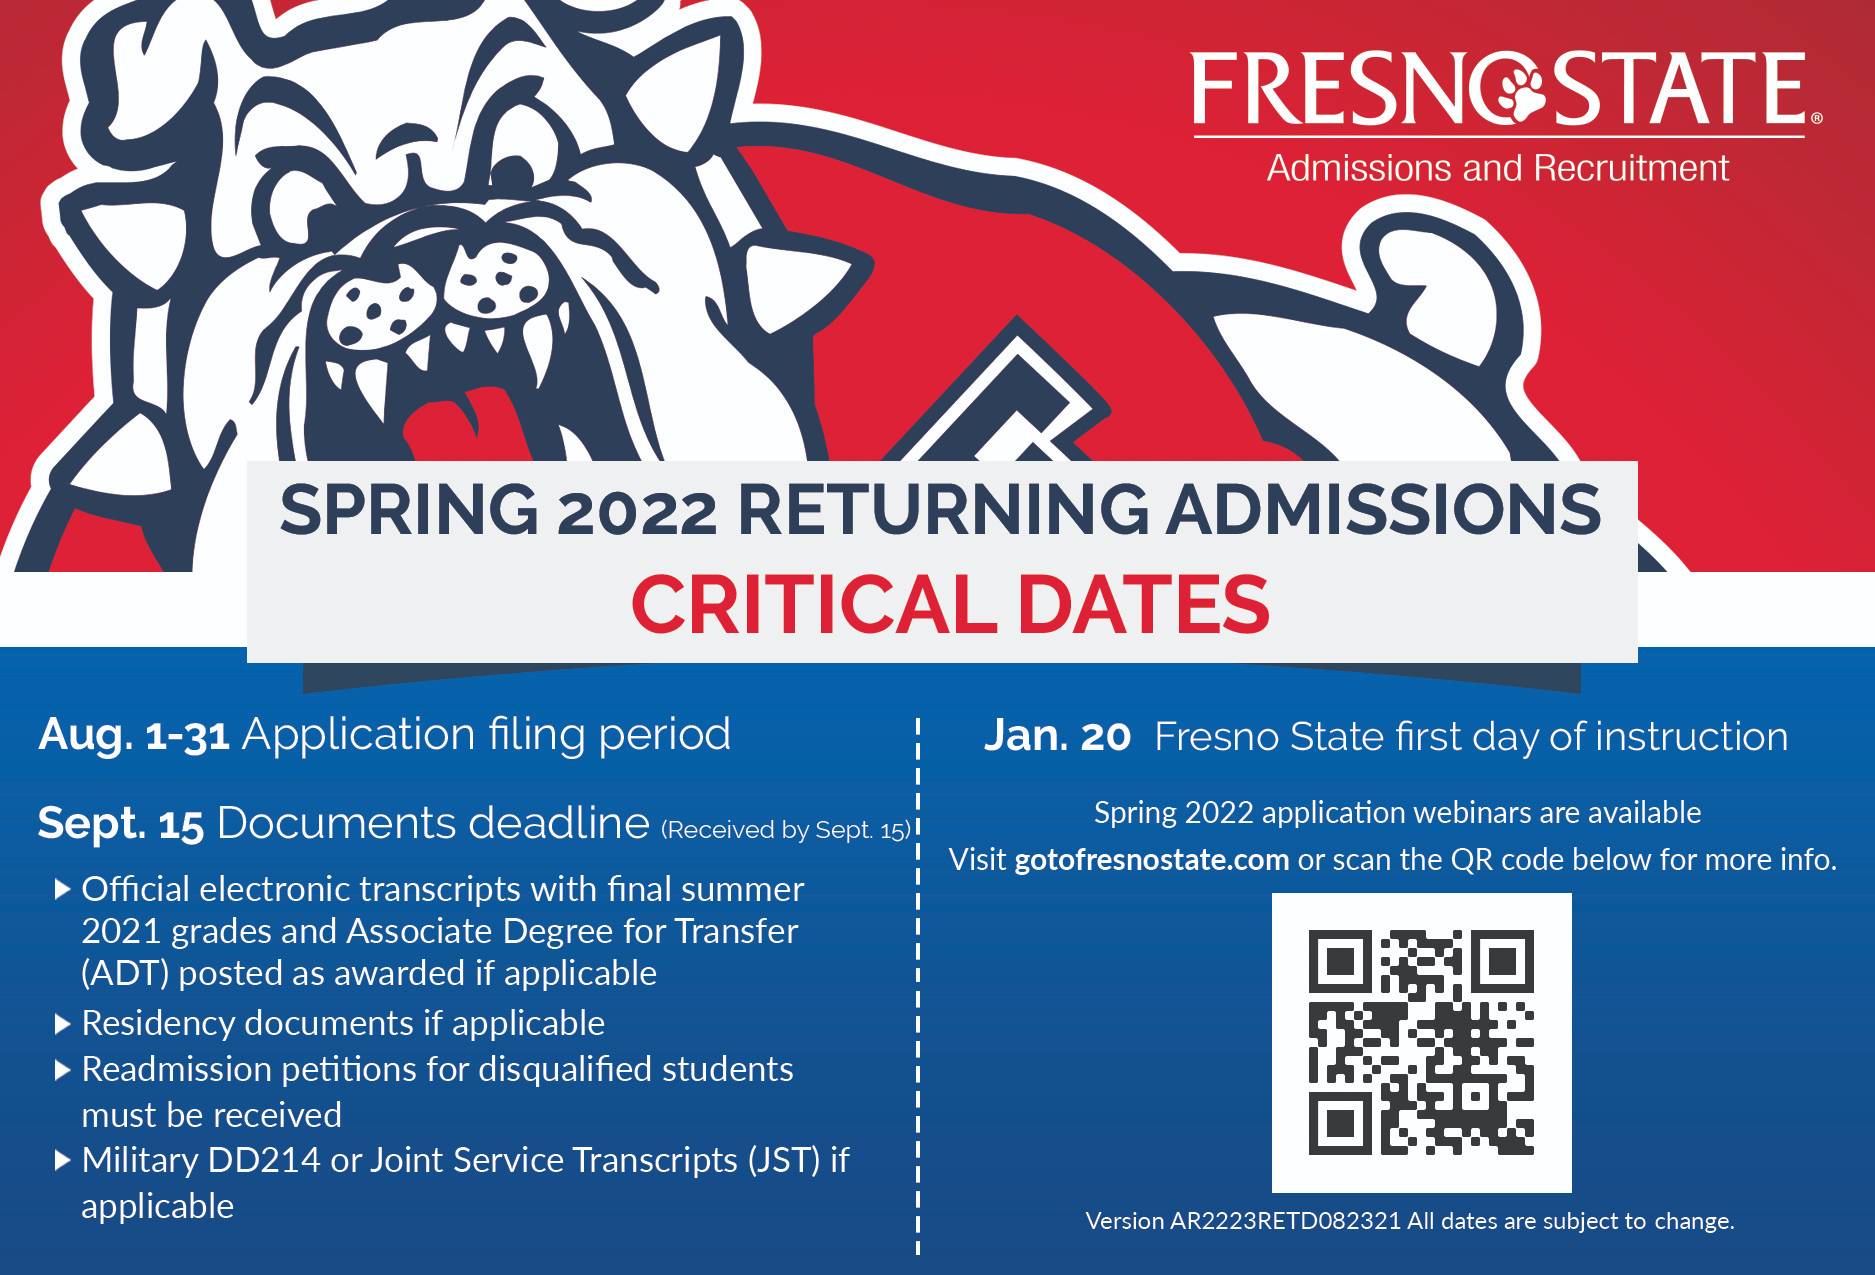 Fresno State Calendar Fall 2022 Returning - Admissions And Recruitment